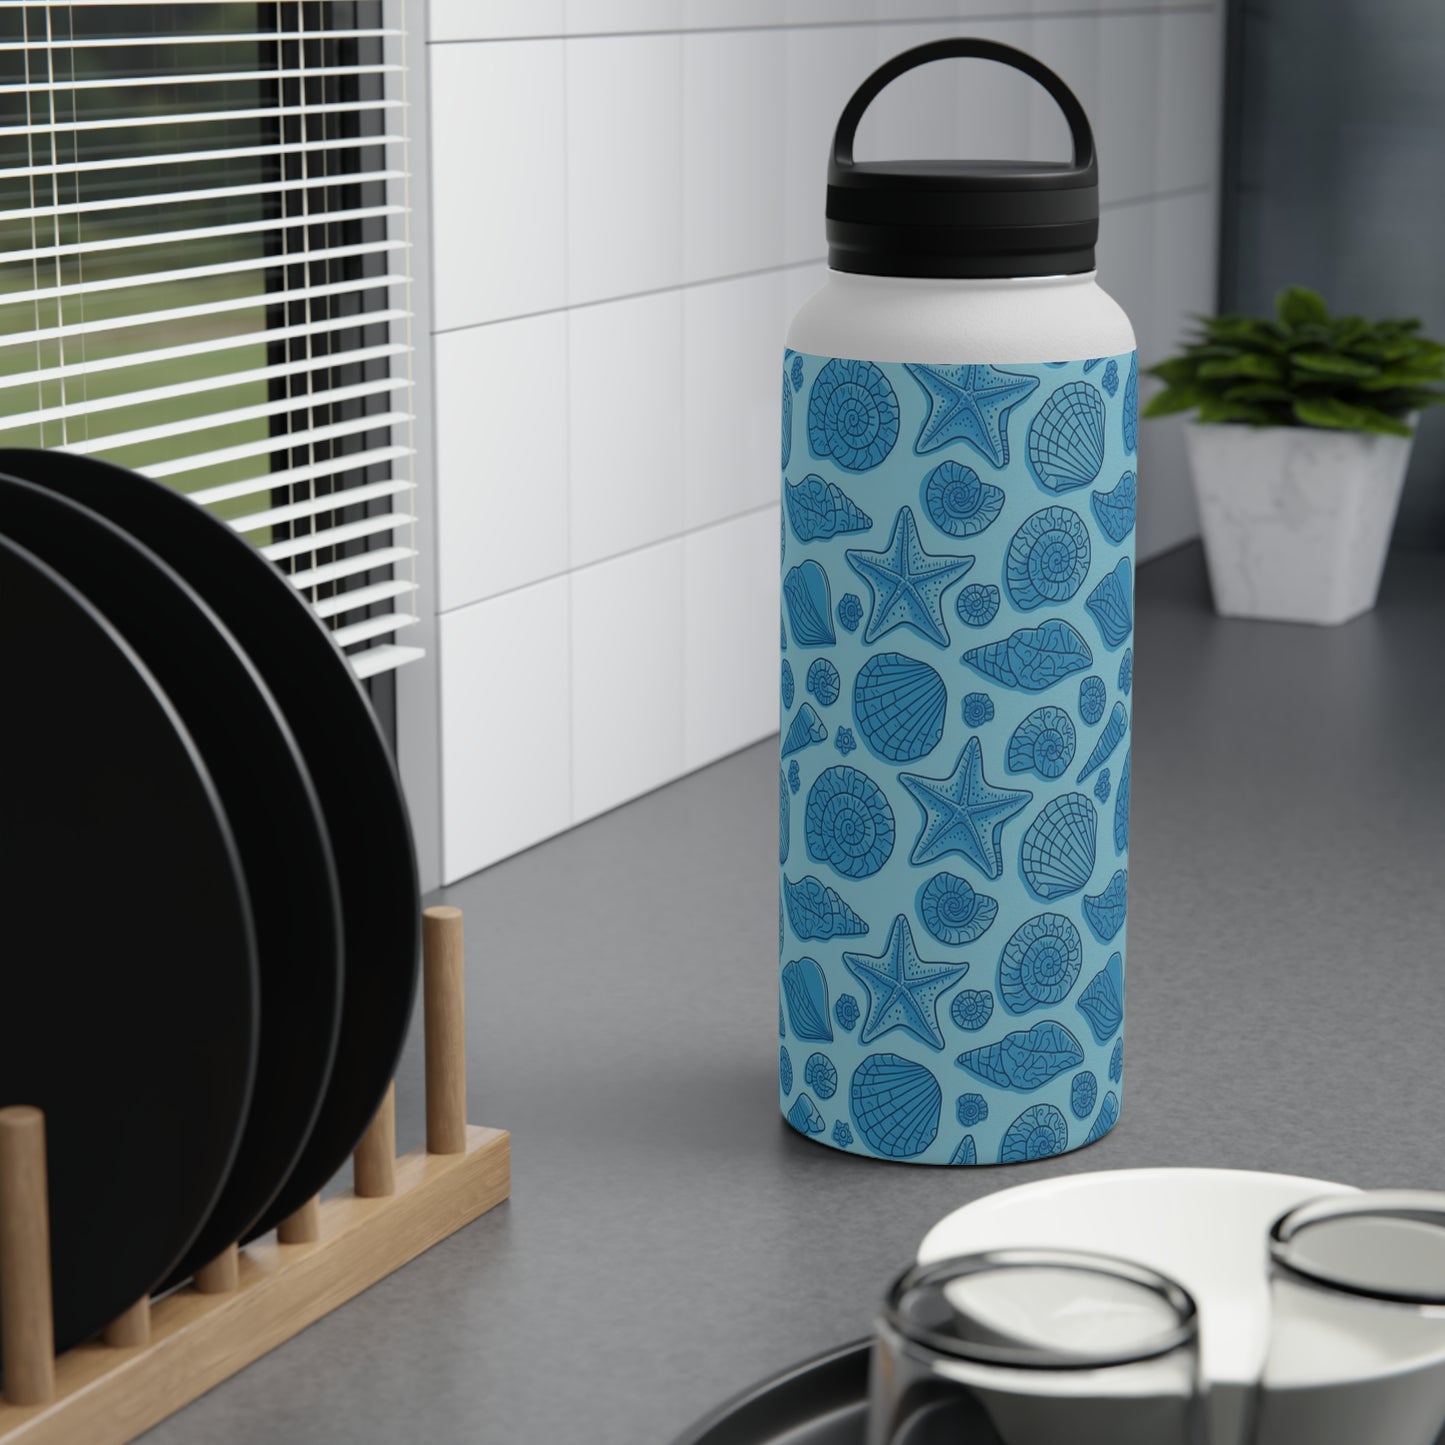 Dive into Enchantment with Blue Mermaid Starfish Seashell Stainless Steel Reusable Water Bottle, Handle Lid, Insulated, Sustainable Living